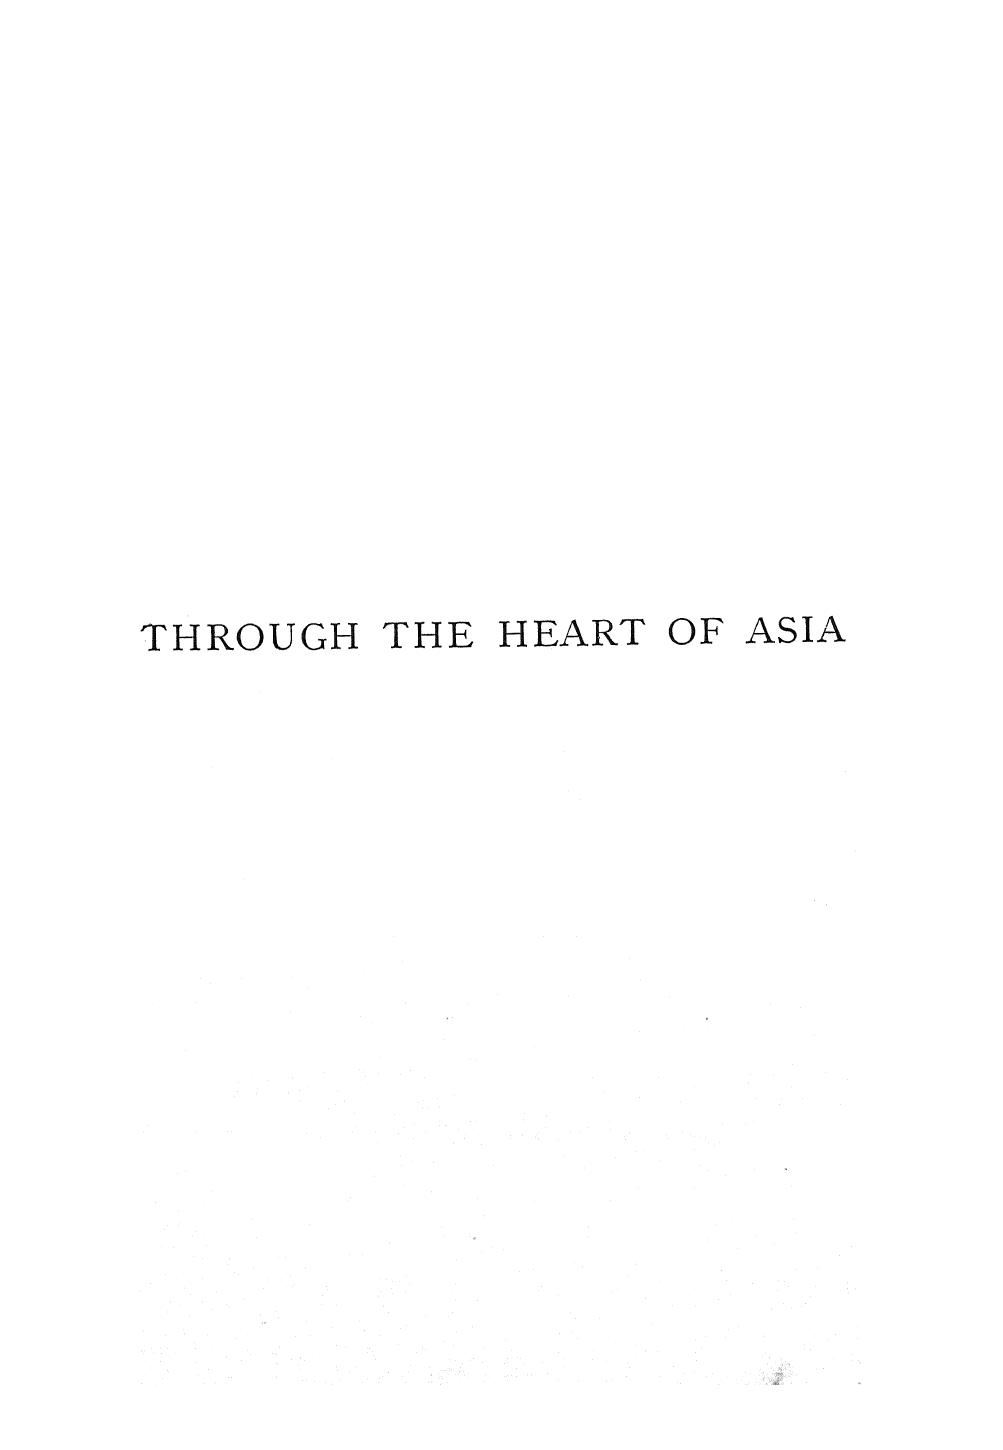 BY Gabriel Bonvalot, WITH 250 Illustrations BY Albert Pepin - Through the heart of asia  . vol. 1 by 1889